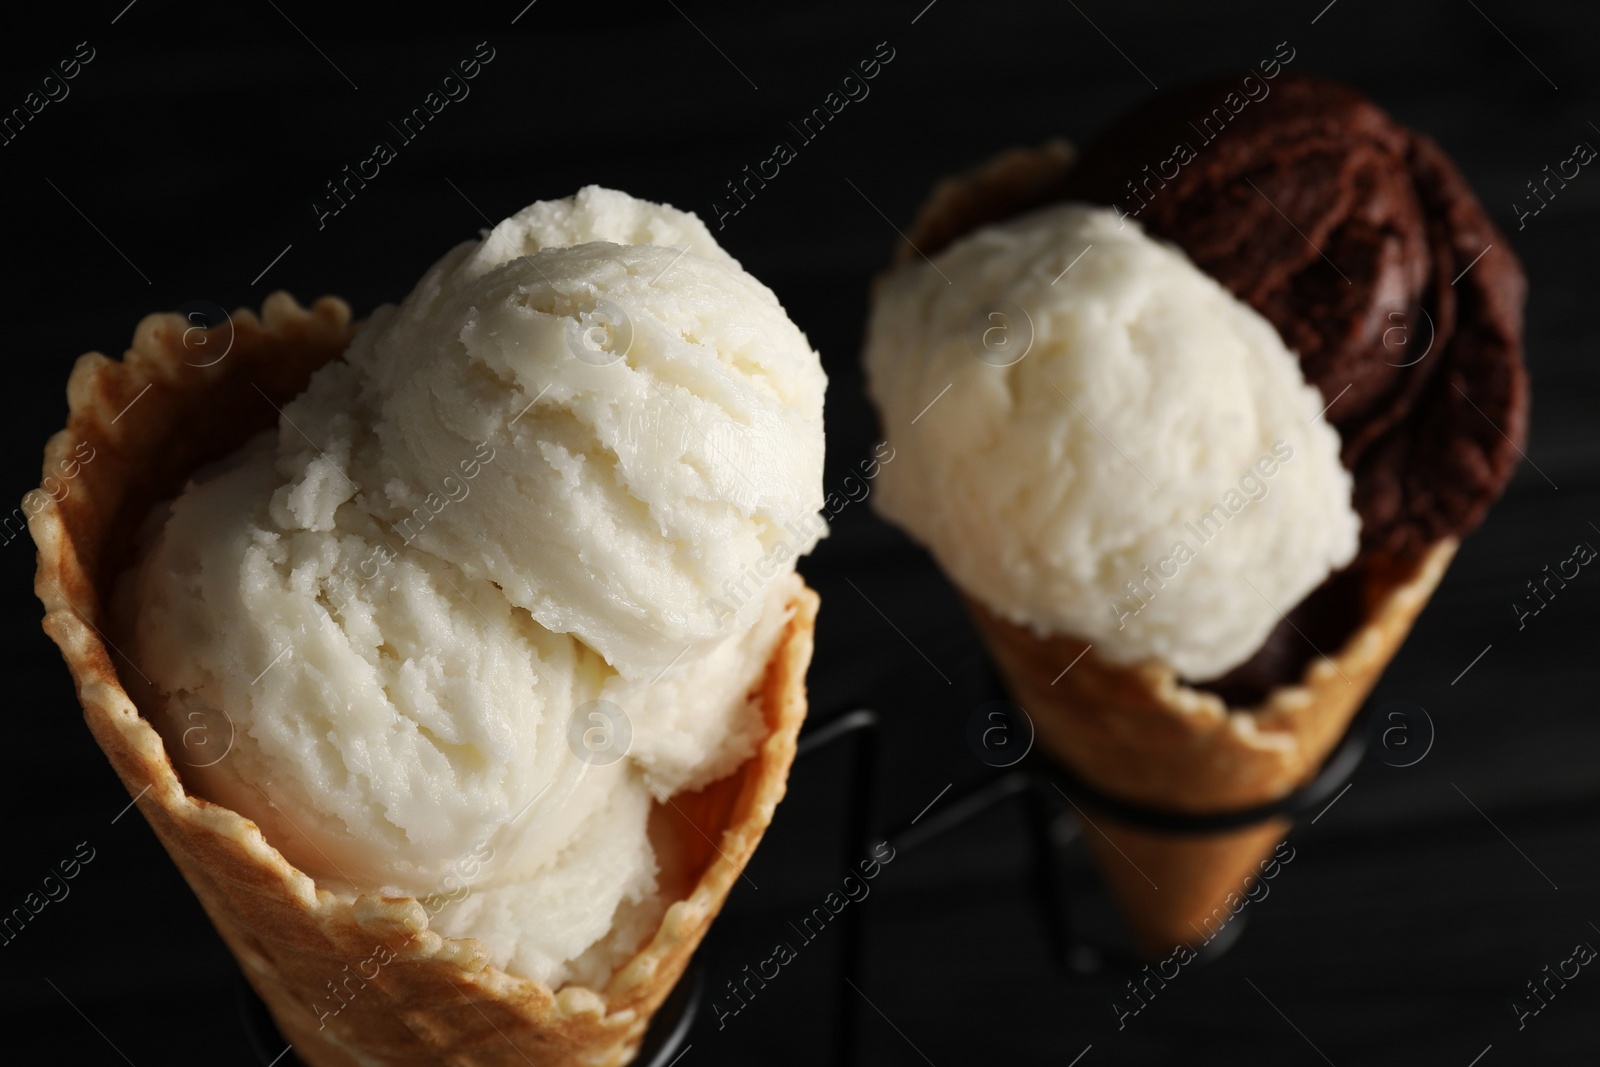 Photo of Ice cream scoops in wafer cones on stand against dark background, closeup